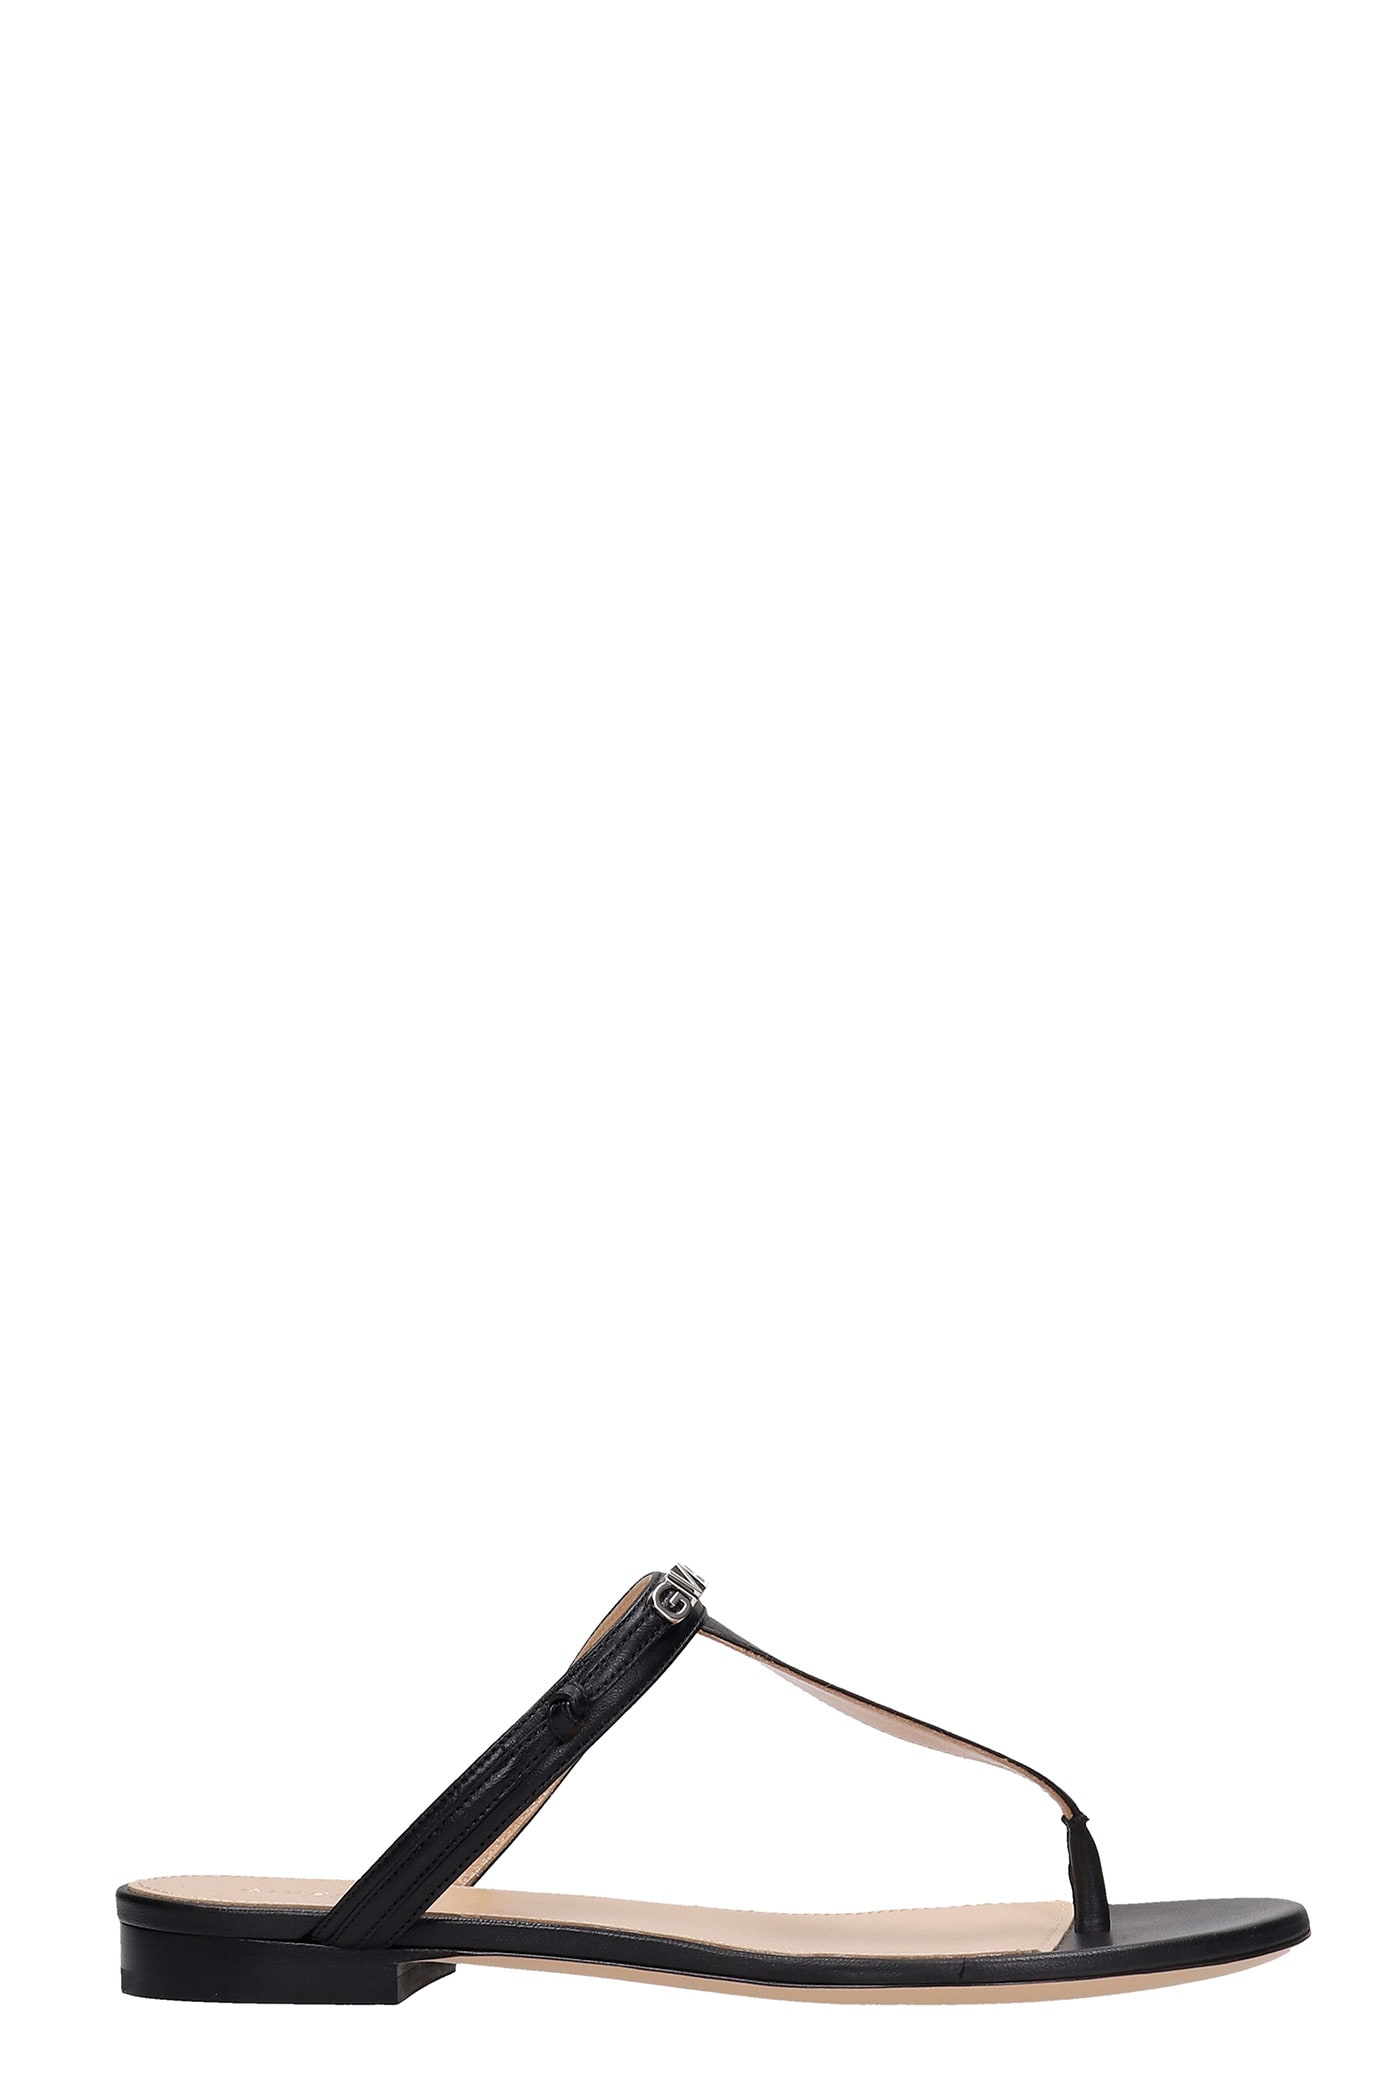 Buy Givenchy Flats In Black Leather online, shop Givenchy shoes with free shipping